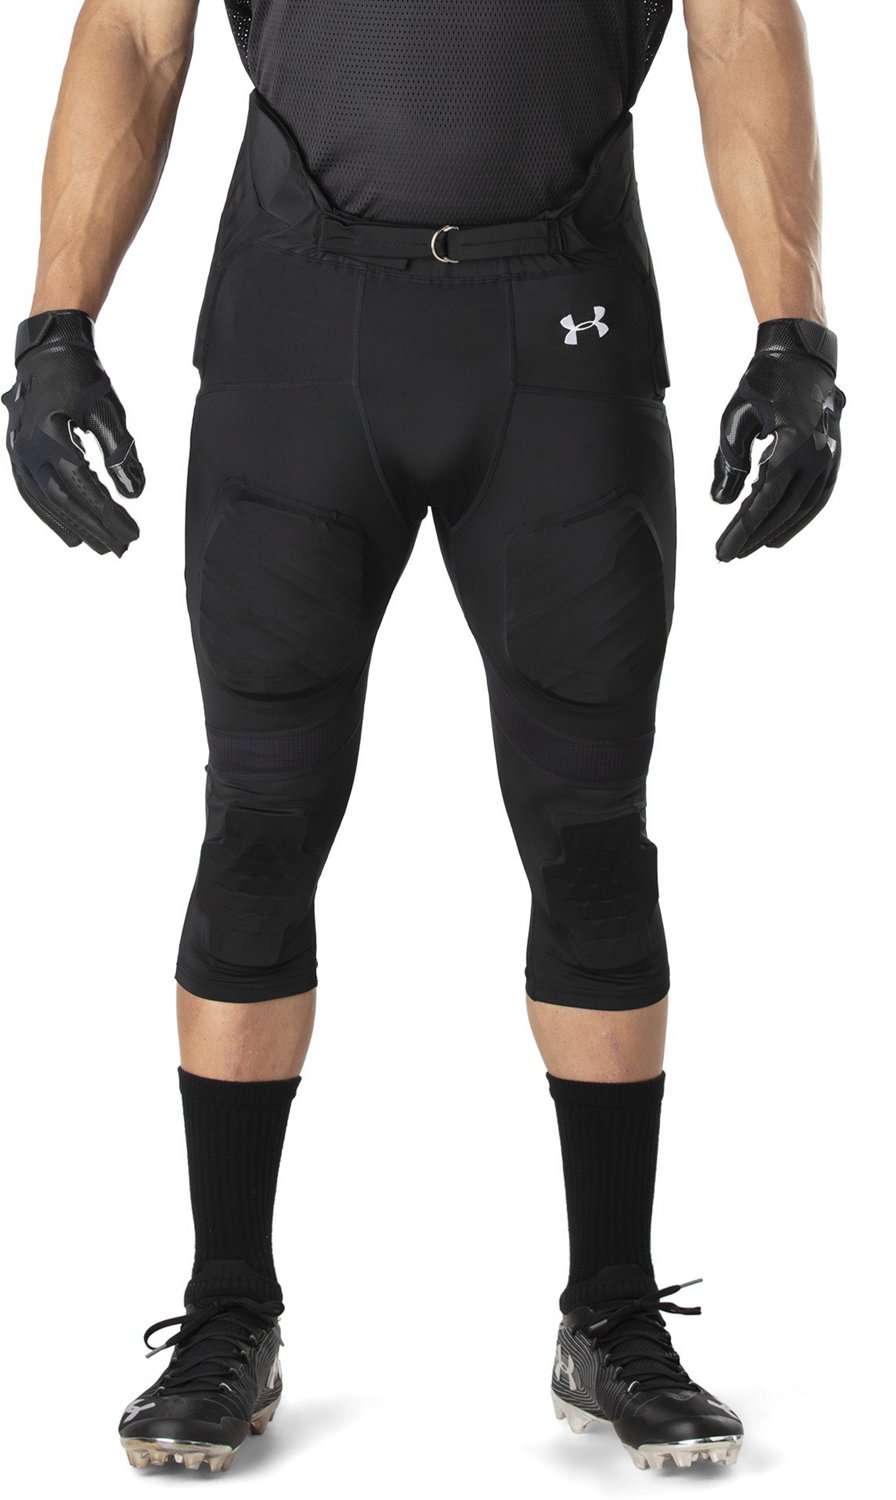 Under Armour Men's Gameday Integrated Football Pants | Academy